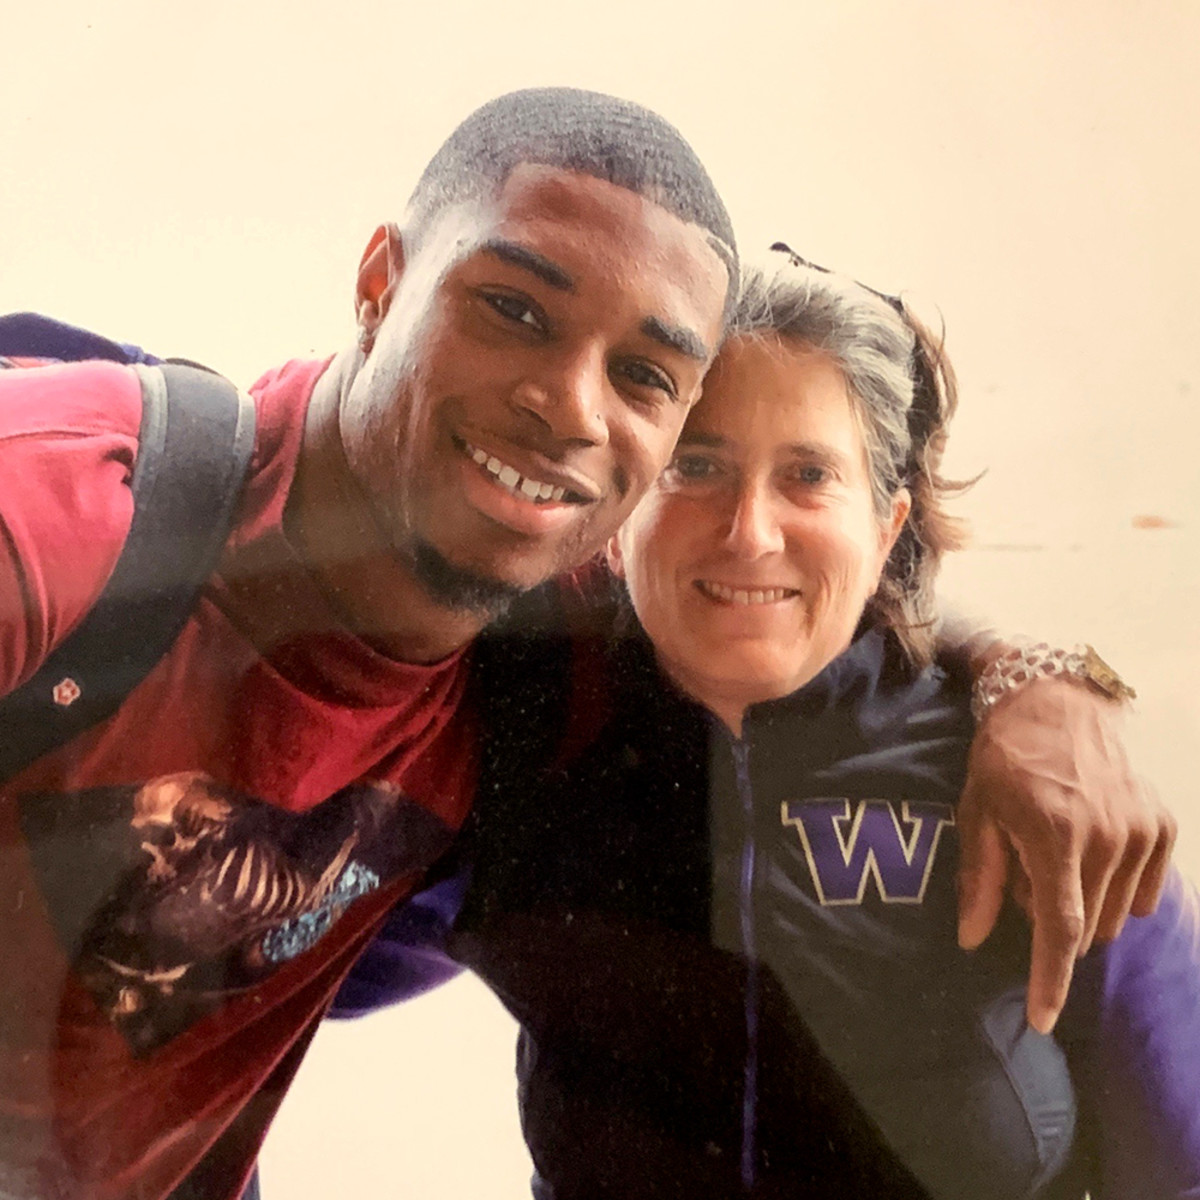 Illinois linebacker Milo Eifler pictured with his mother, Rachel Morello-Frosch, who has a master’s and doctorate degree in public health and is a research professor at University of California-Berkeley. Eifler transferred to Illinois from Washington after his redshirt freshman season. 